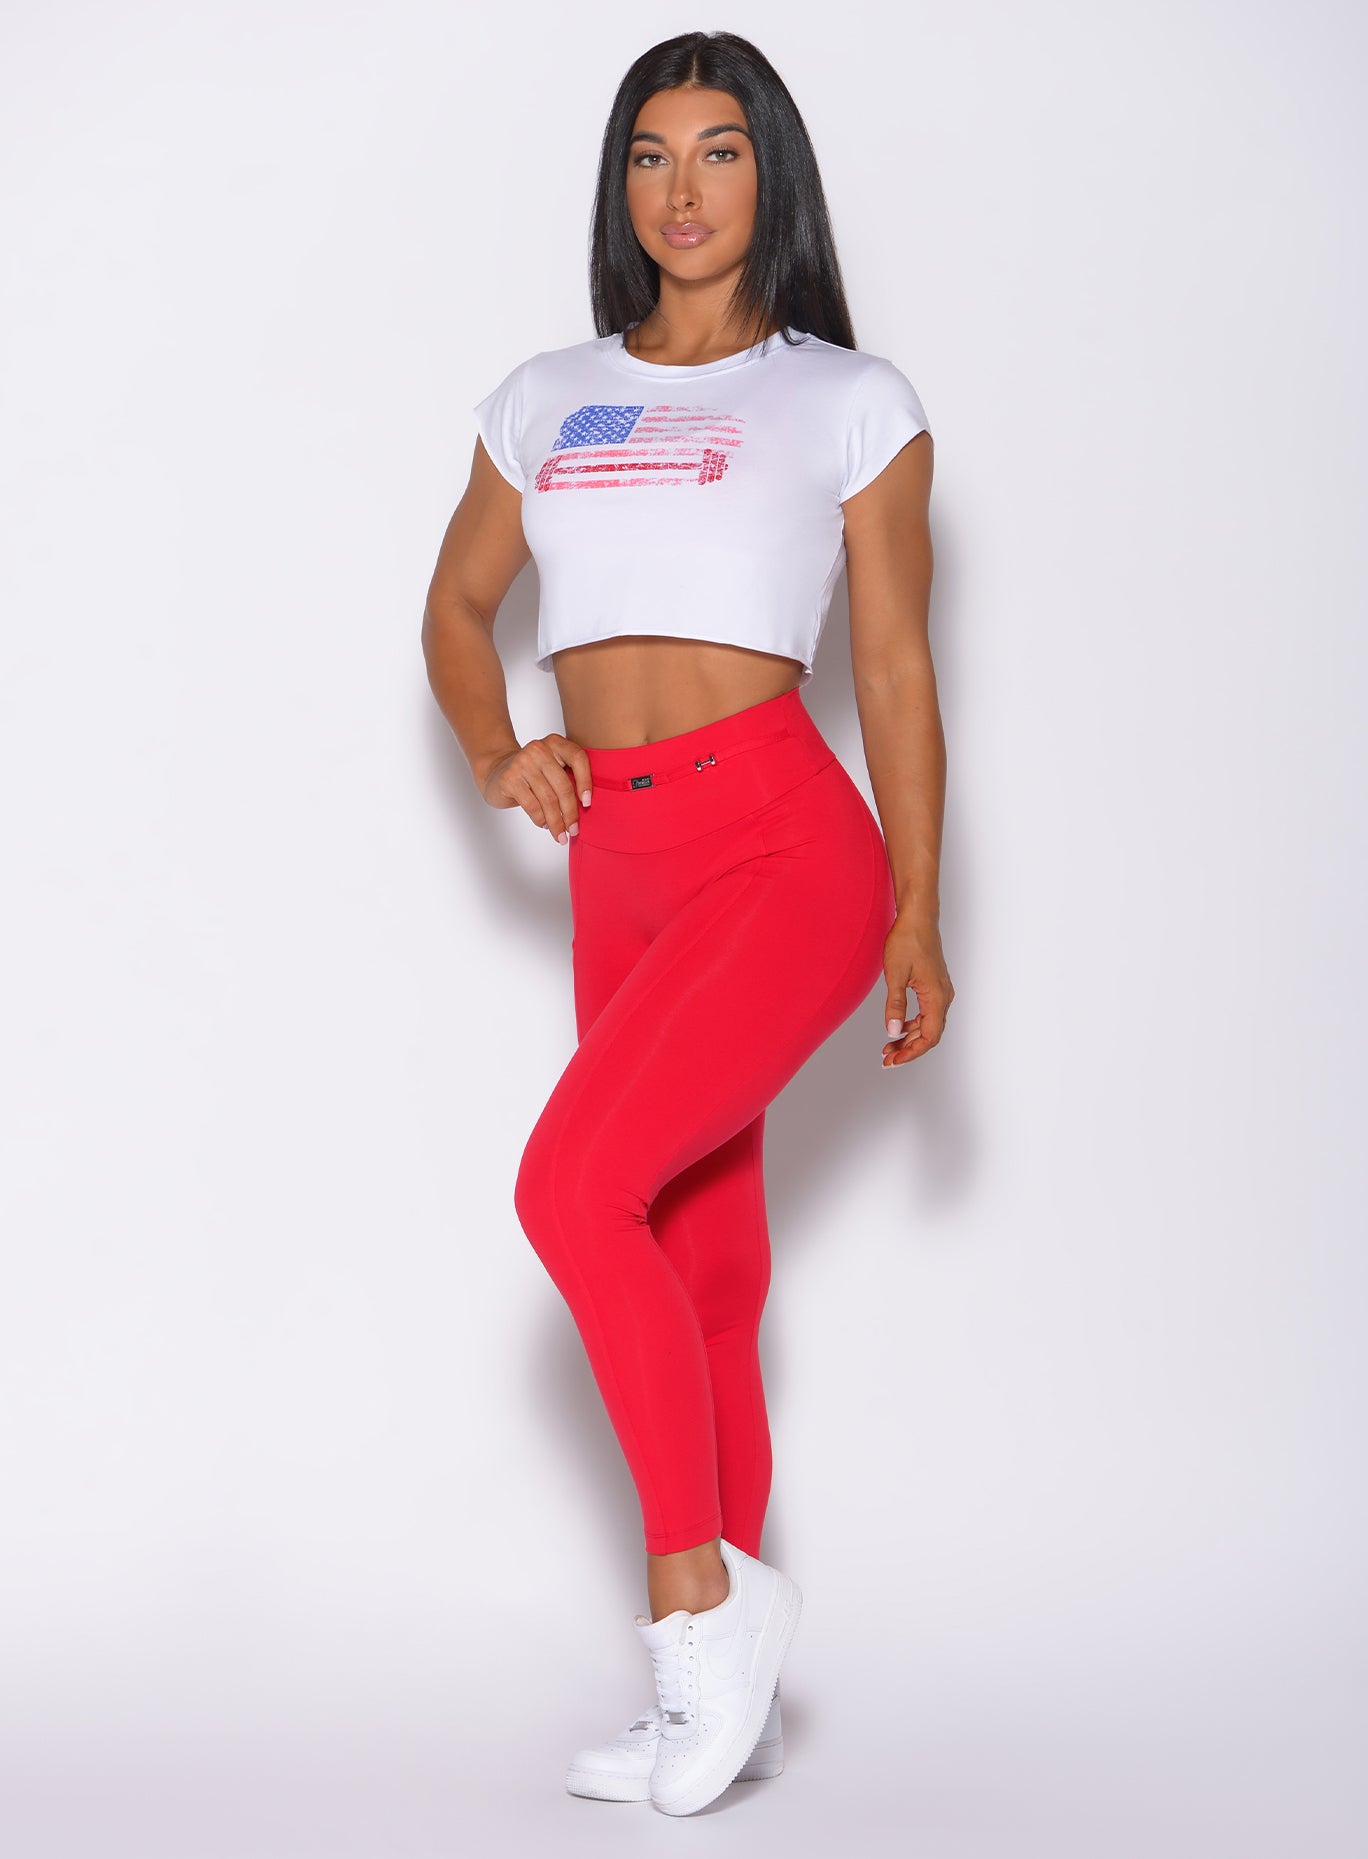 Left side profile view of a model angled left wearing our white USA Barbell tee and a red leggings